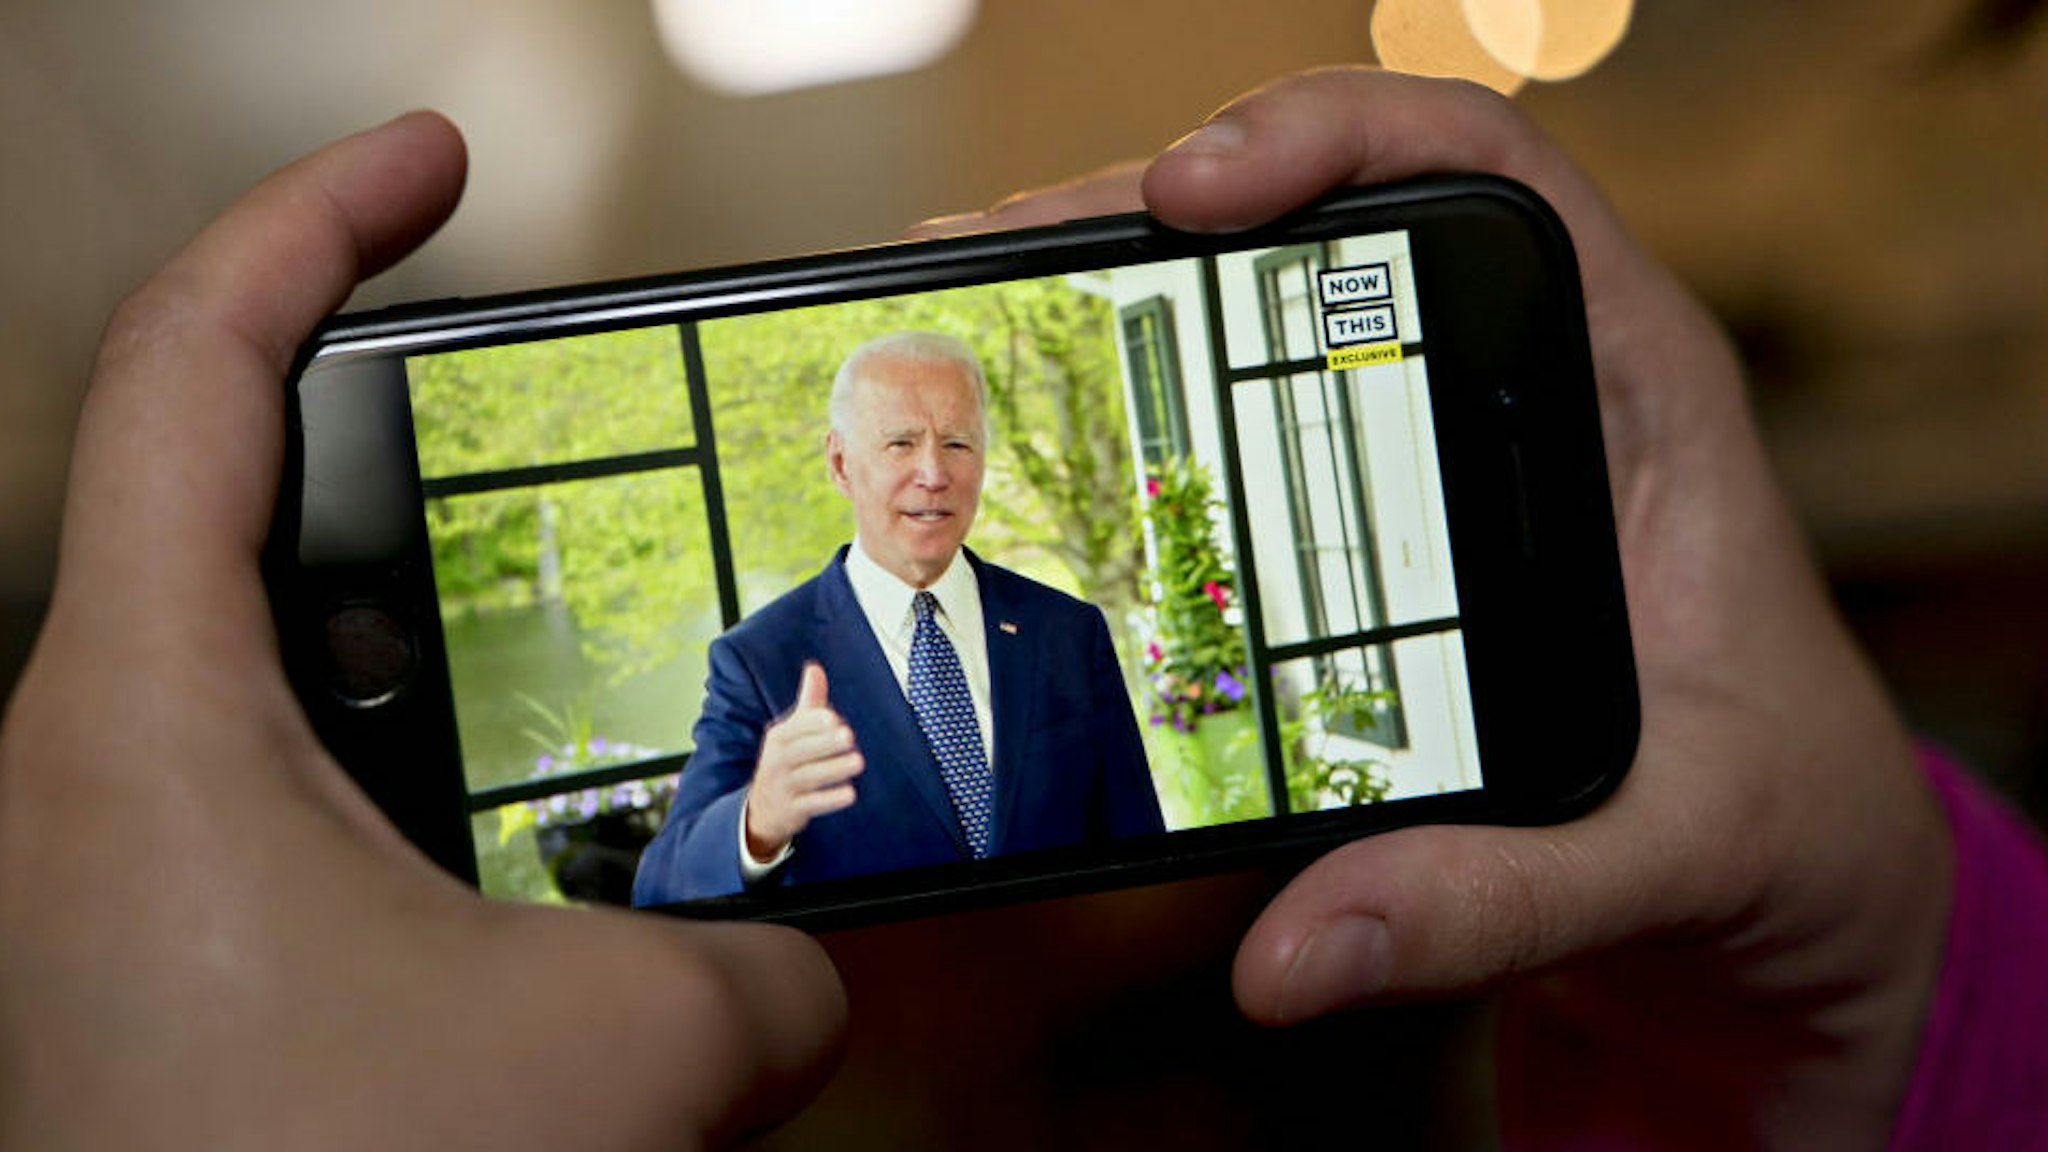 Former Vice President Joe Biden, presumptive Democratic presidential nominee, speaks during a NowThis economic address seen on a smartphone in Arlington, Virginia, U.S., on Friday, May 8, 2020. A super political action committee backing Joe Biden will launch a $10 million television ad campaign touting the presumptive Democratic nominee's leadership on the economic recovery after the 2008 financial crisis. Photographer: Andrew Harrer/Bloomberg